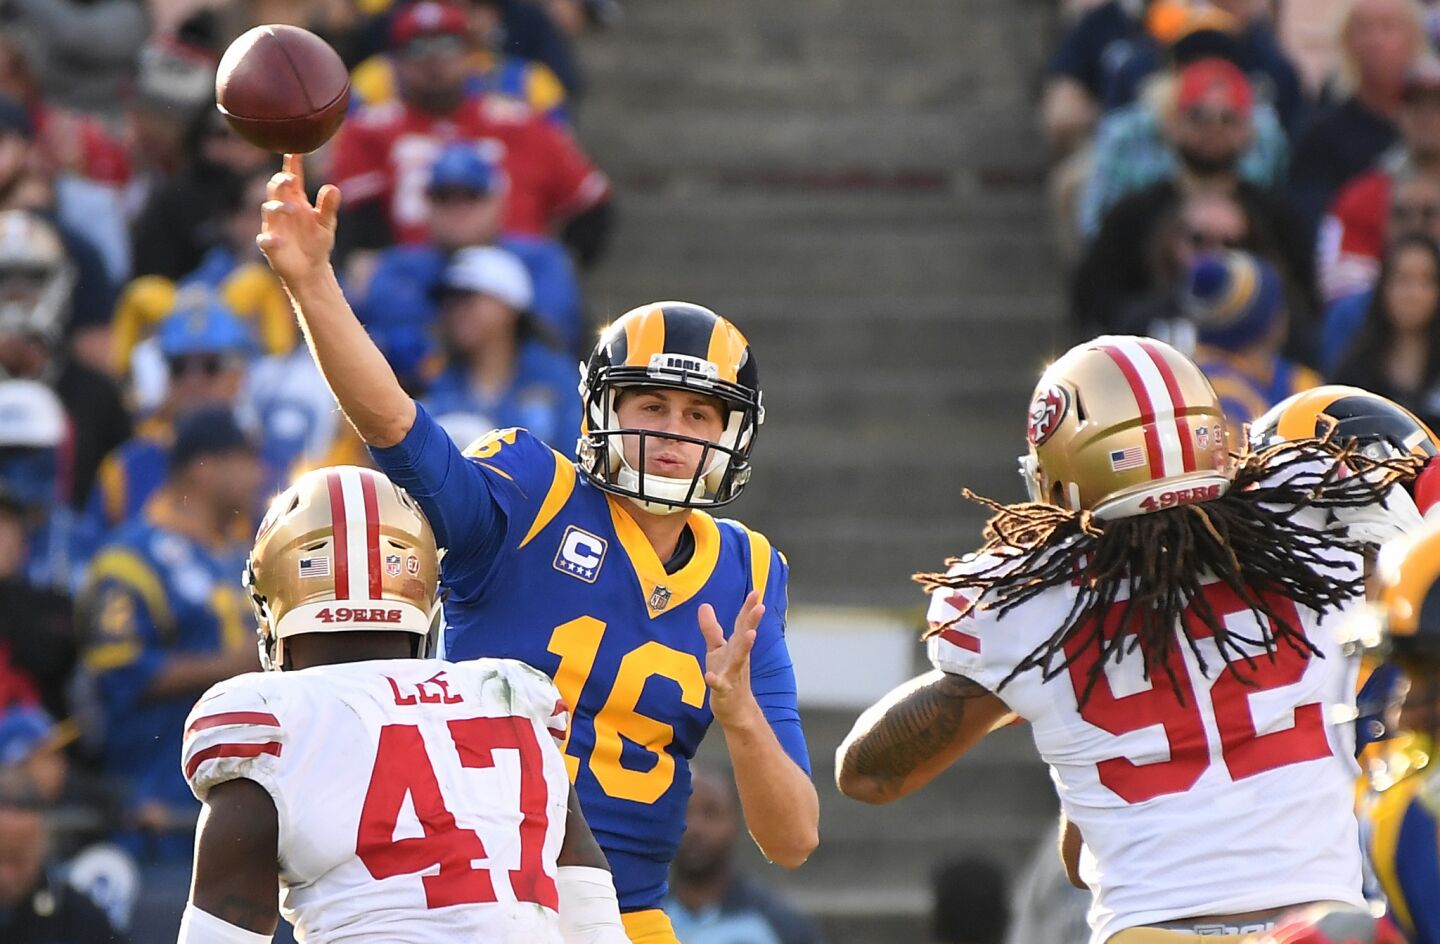 Rams quarterback Jared Goff throws a pass against the 49ers.